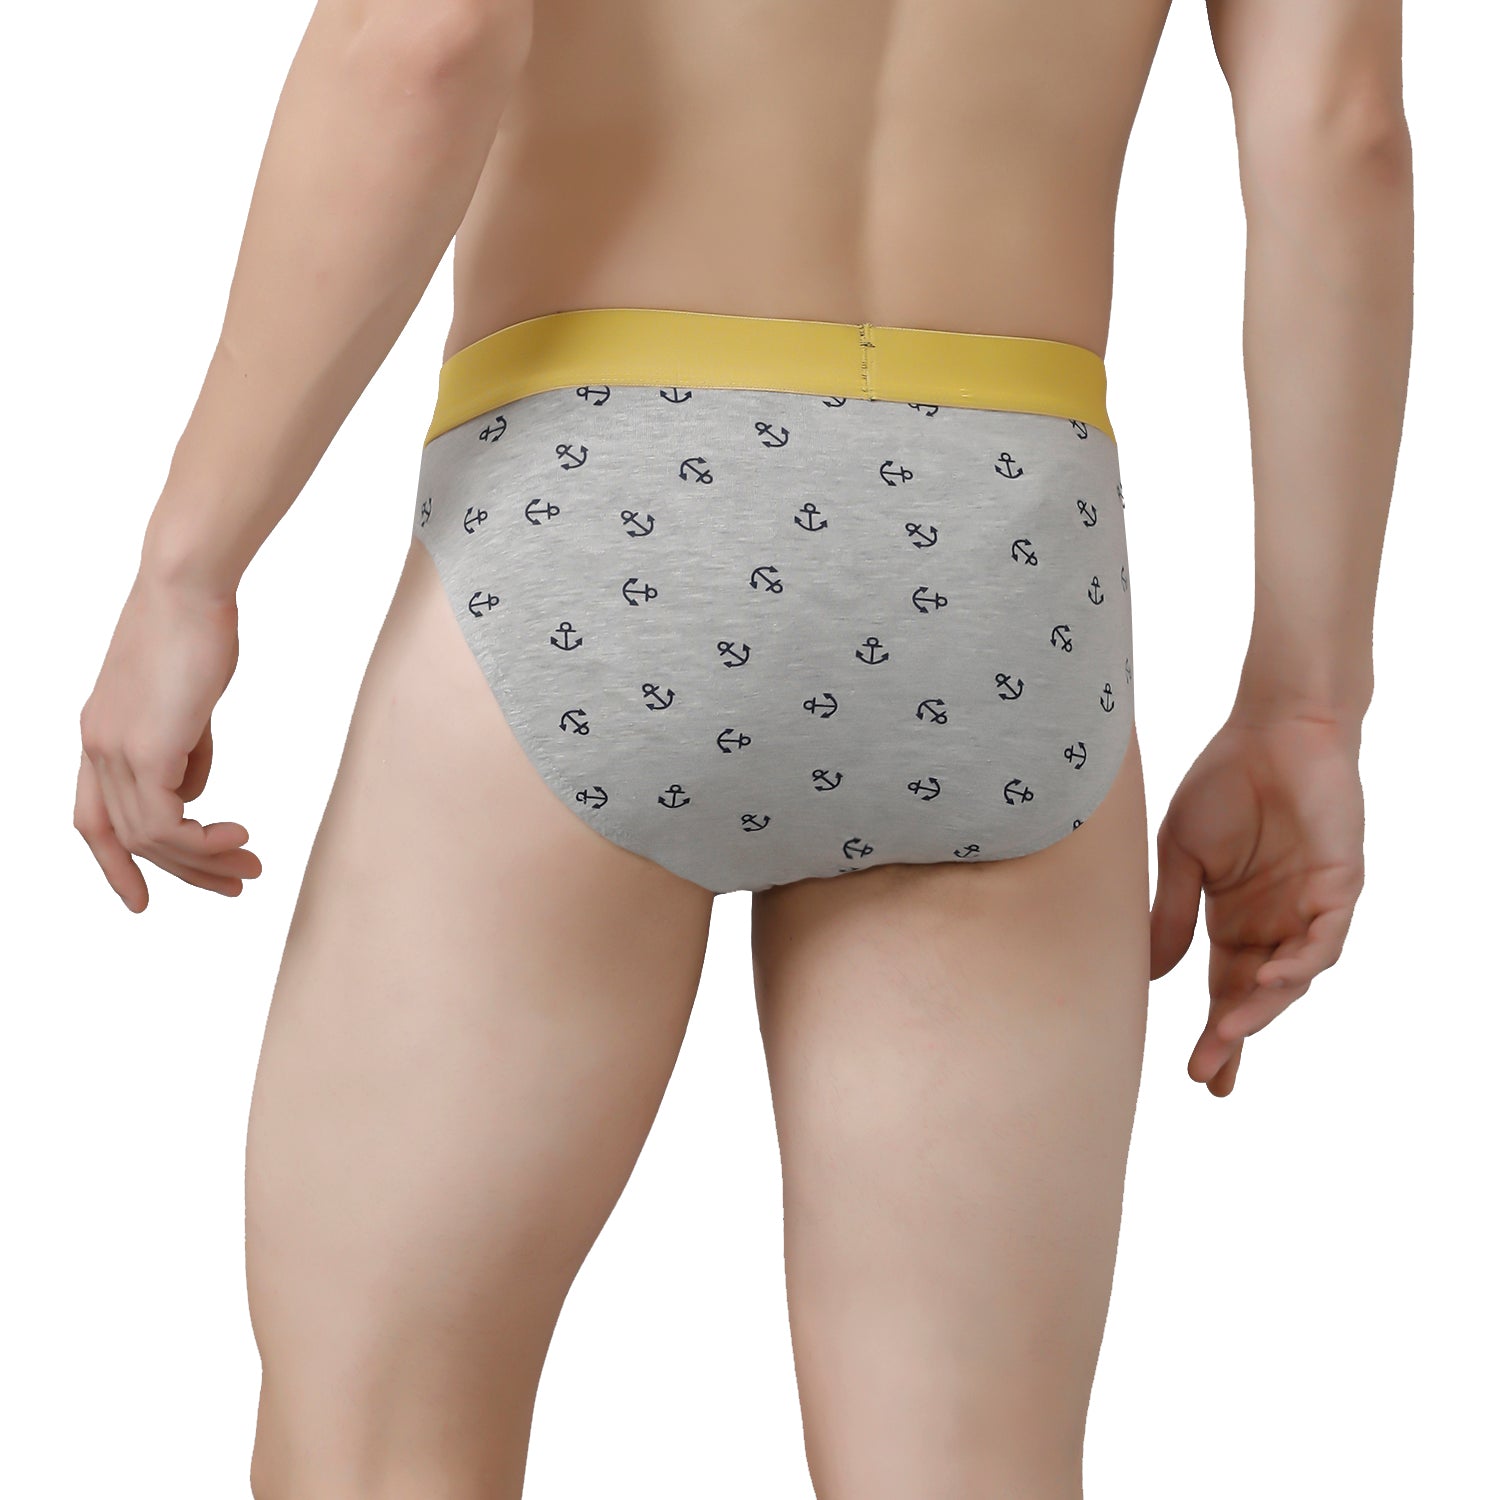 Buy CP BRO Printed Trunks with Exposed Waistband Value - Grey Leaf